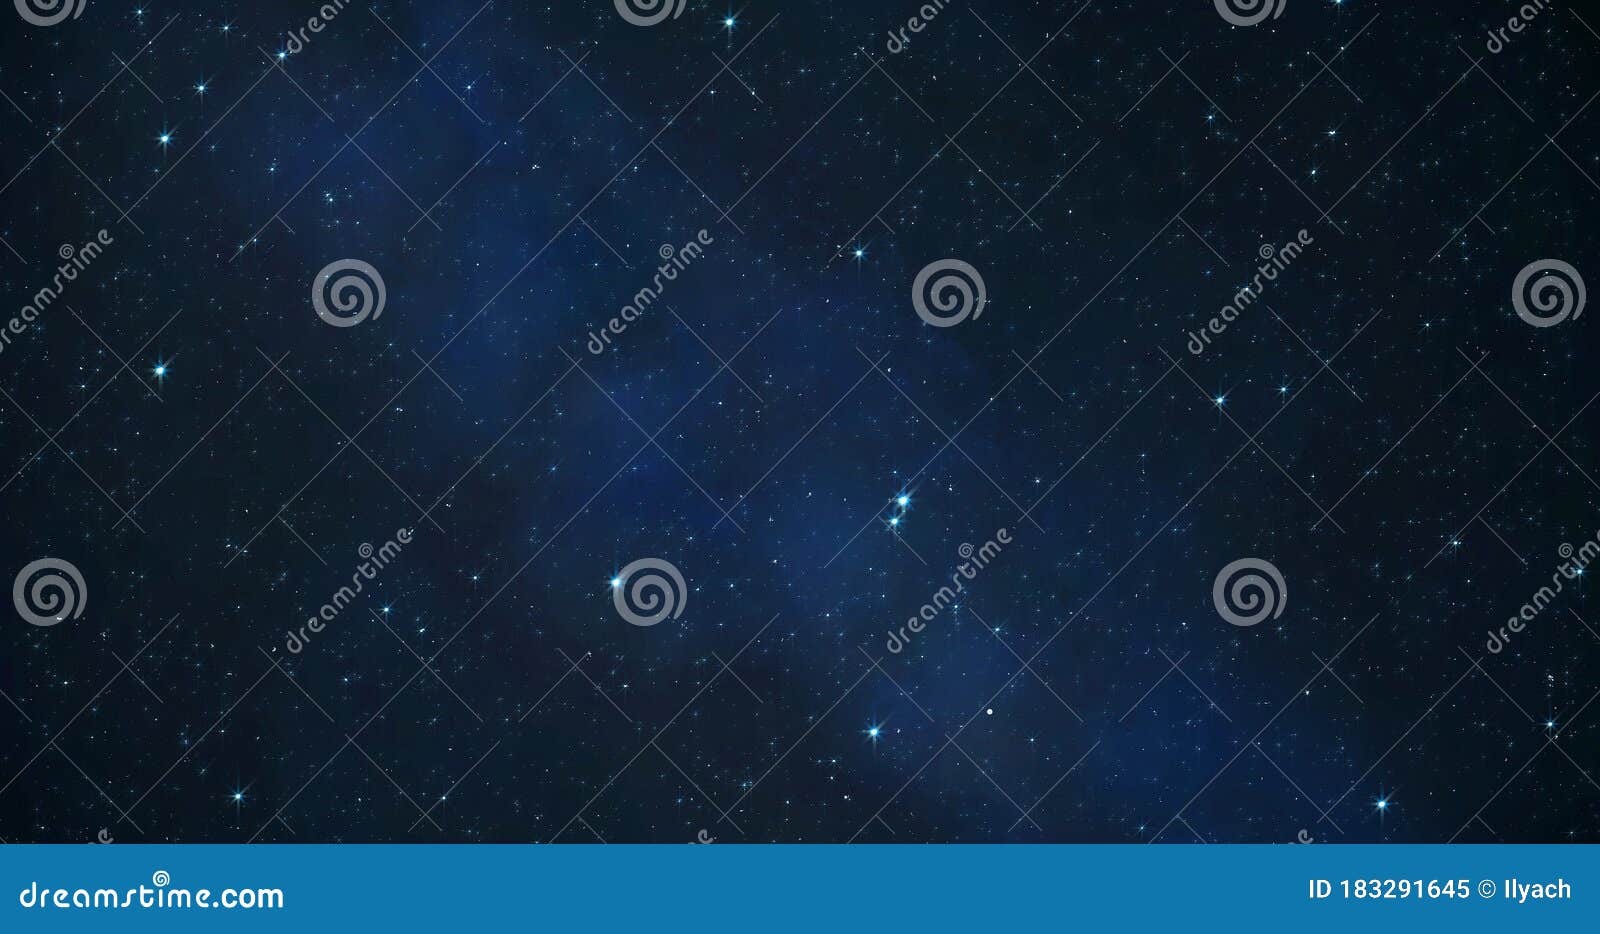 stars in sky, starry night blue starlight shine of milky way, shooting star and meteorite comet in space universe. twinkling